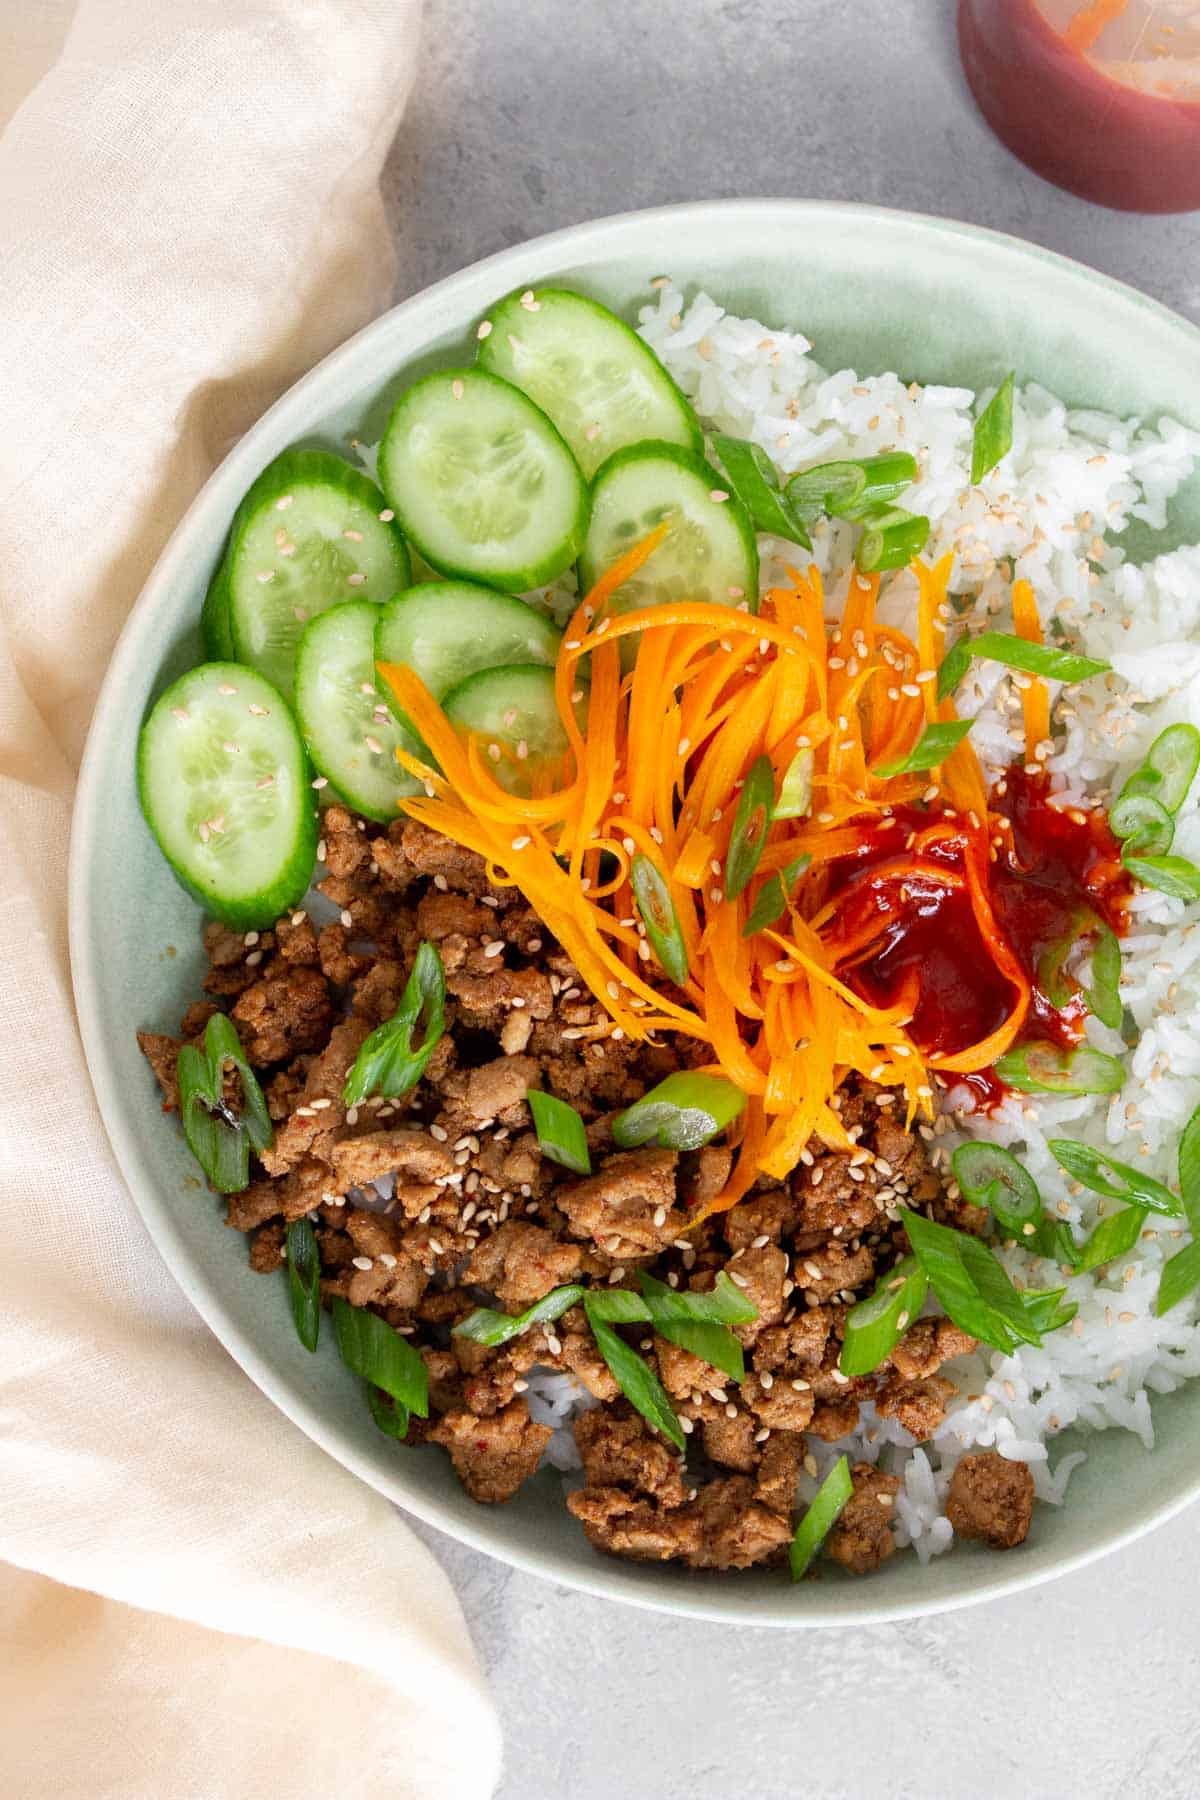 Overhead view of a closer view of ground turkey, cucumber, carrots, sauce, green onions, and rice.